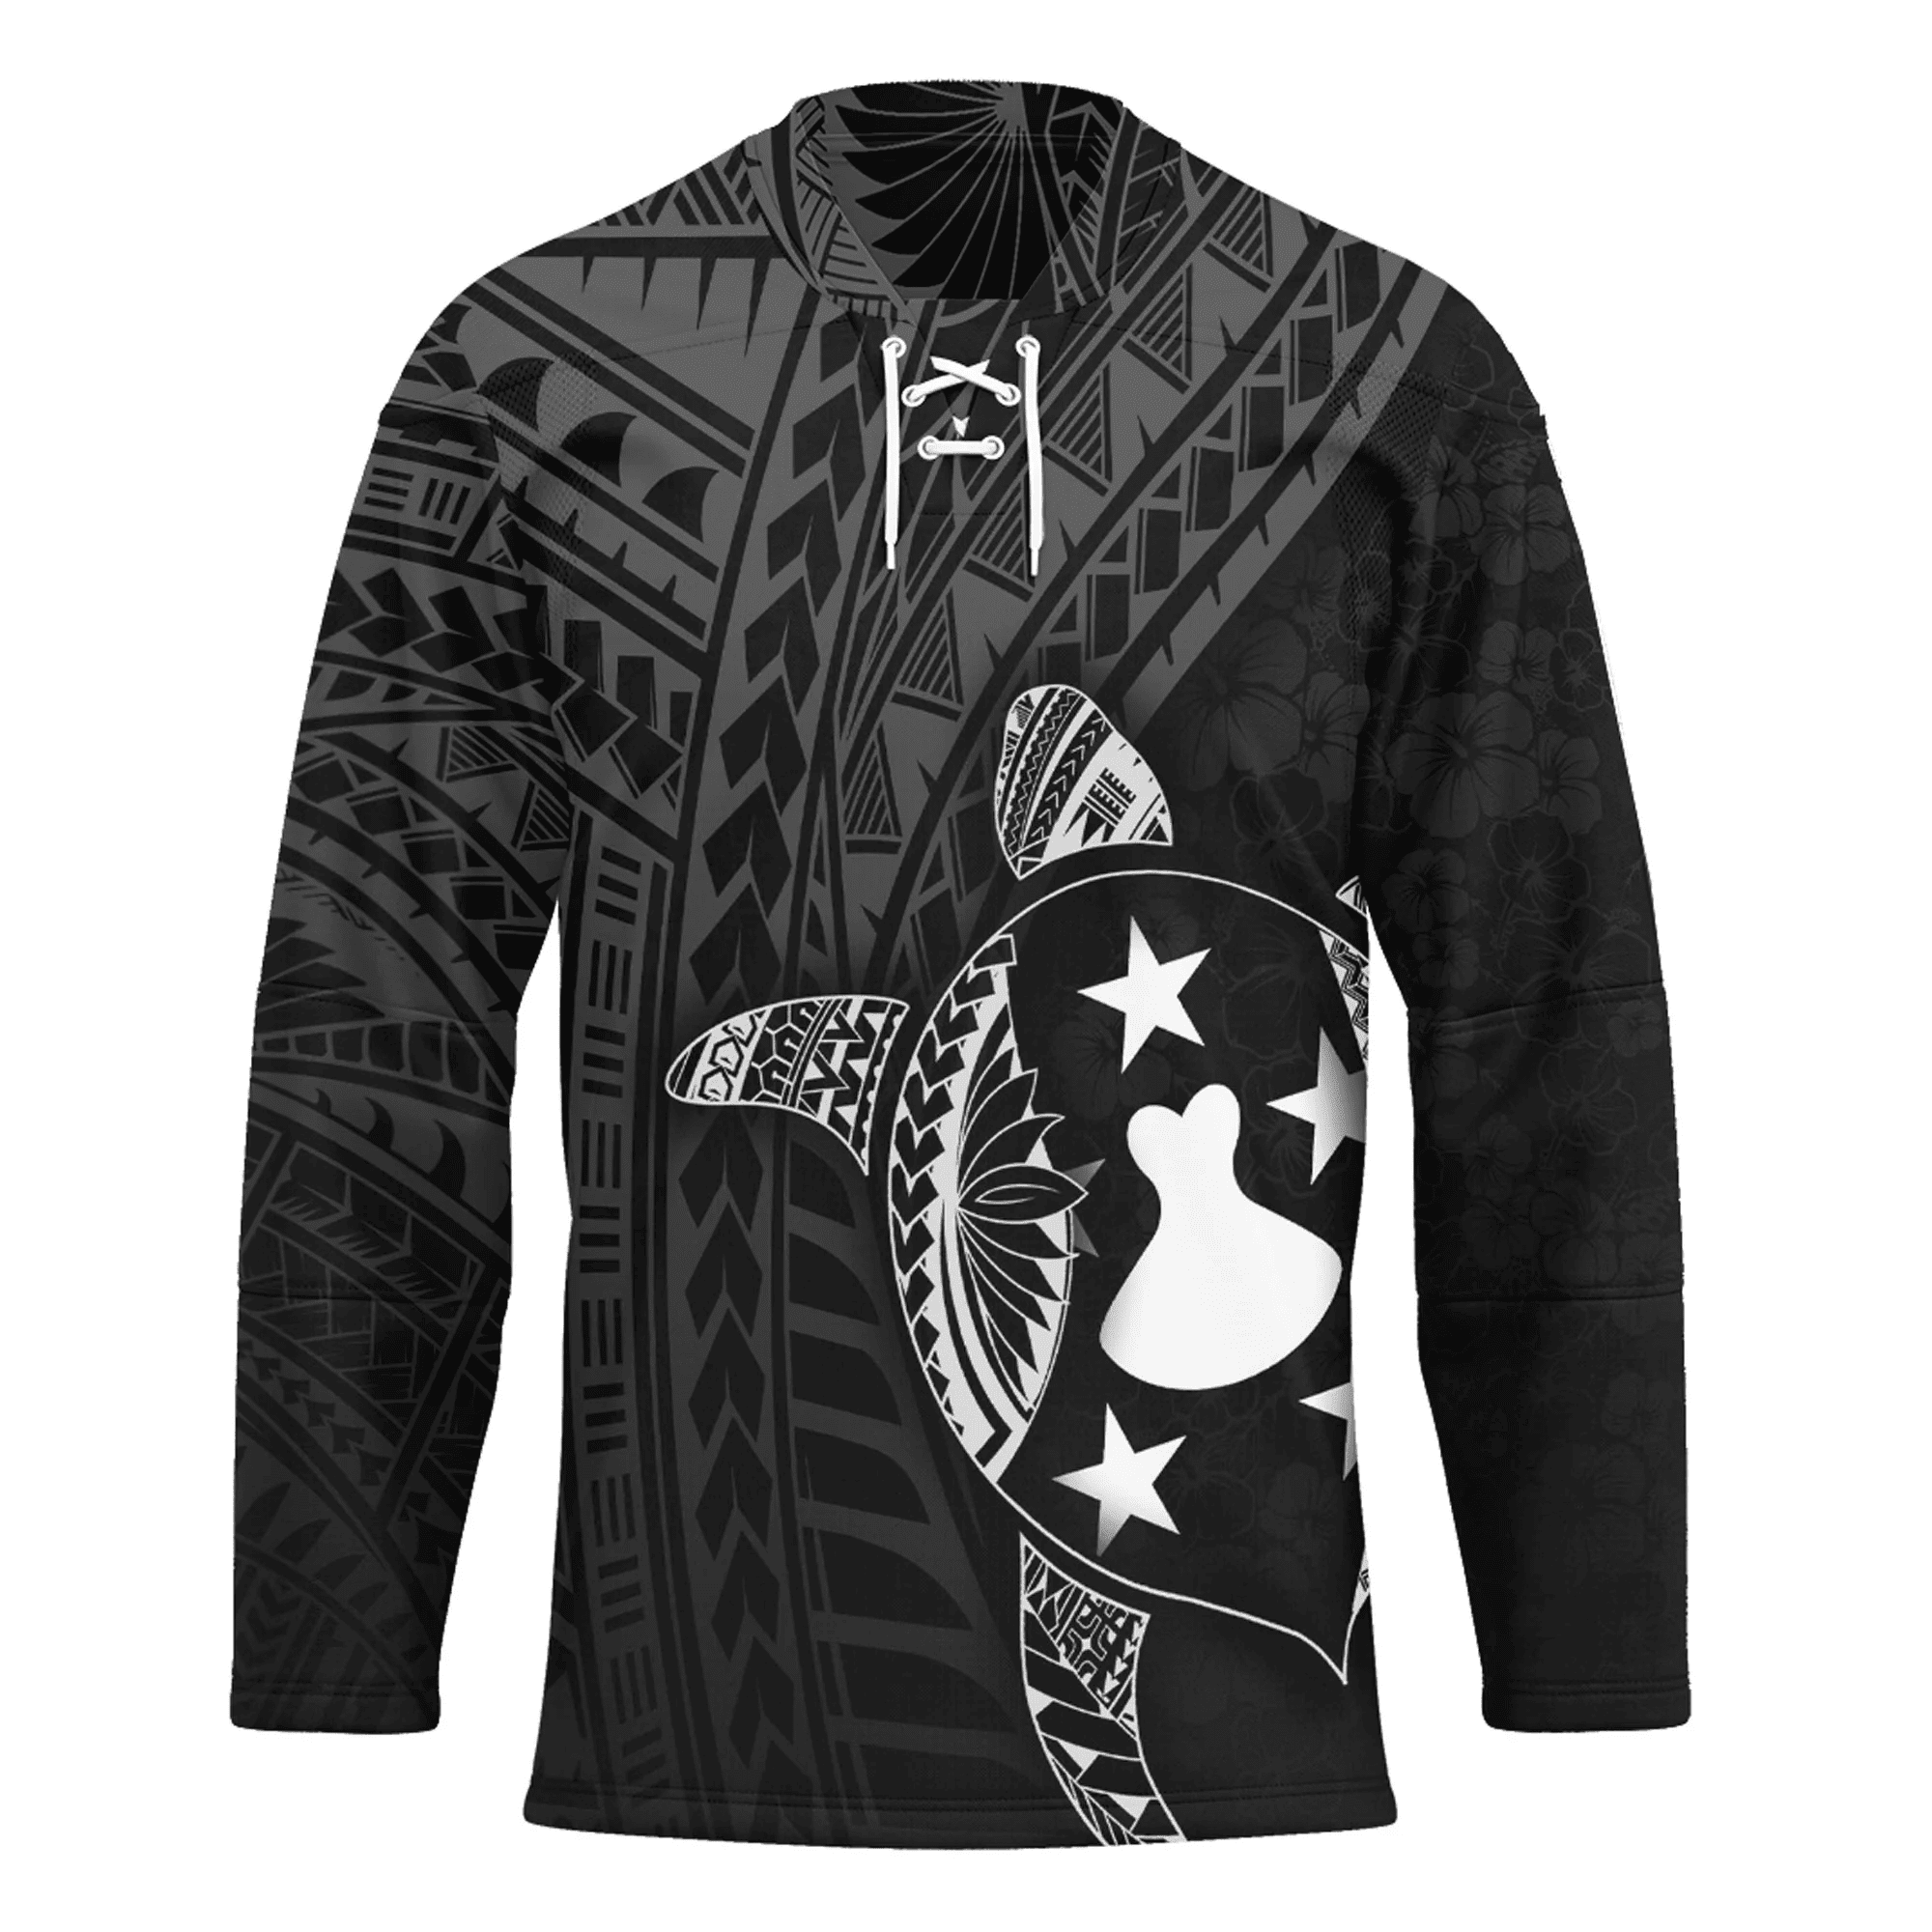 Love New Zealand Clothing - Austral Islands Polynesia Turtle Coat Of Arms Hockey Jersey A95 | Love New Zealand